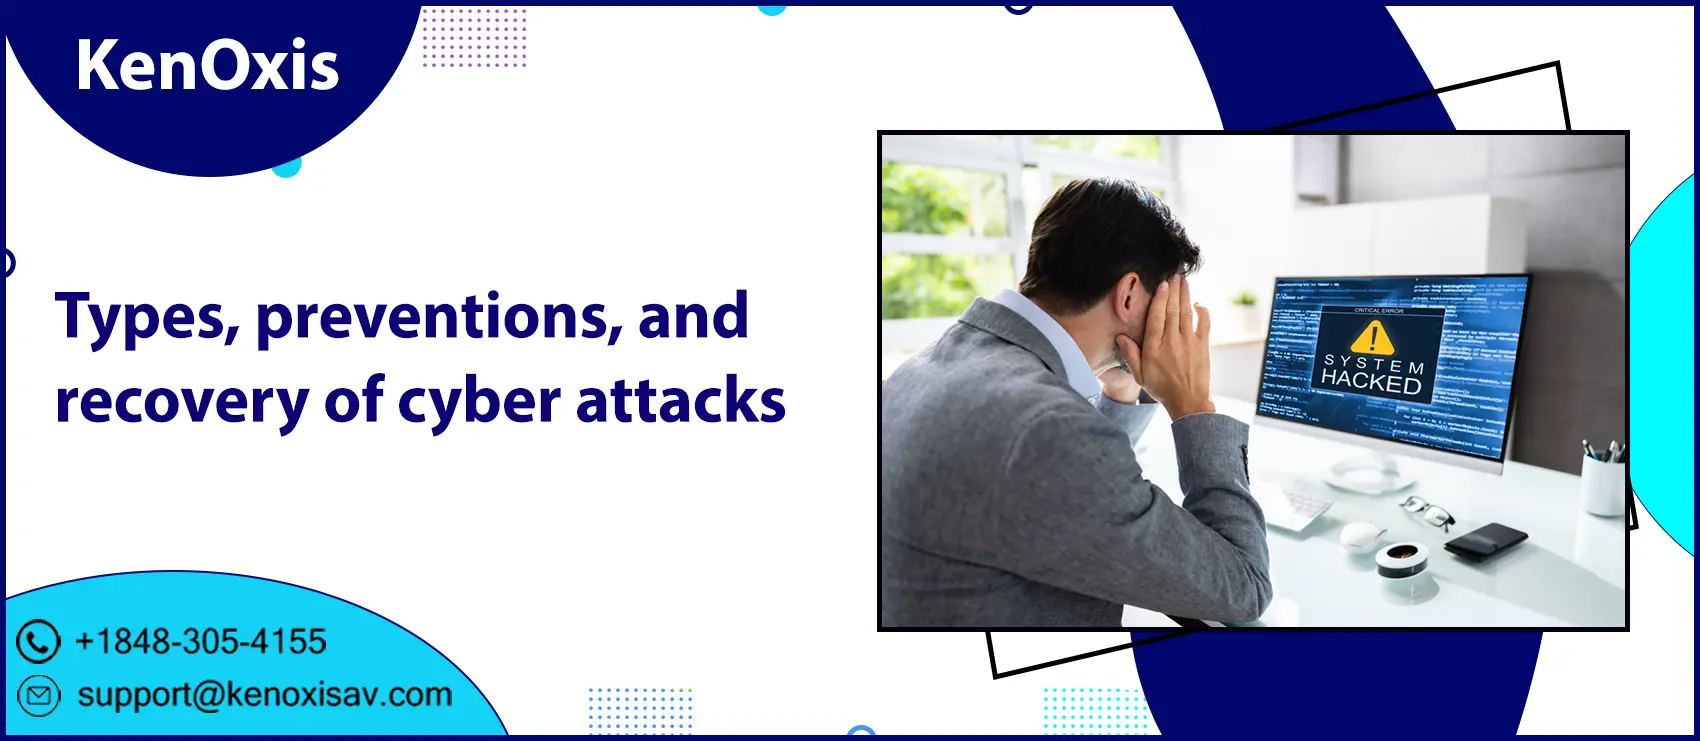 Types, preventions, and recovery of cyber attacks